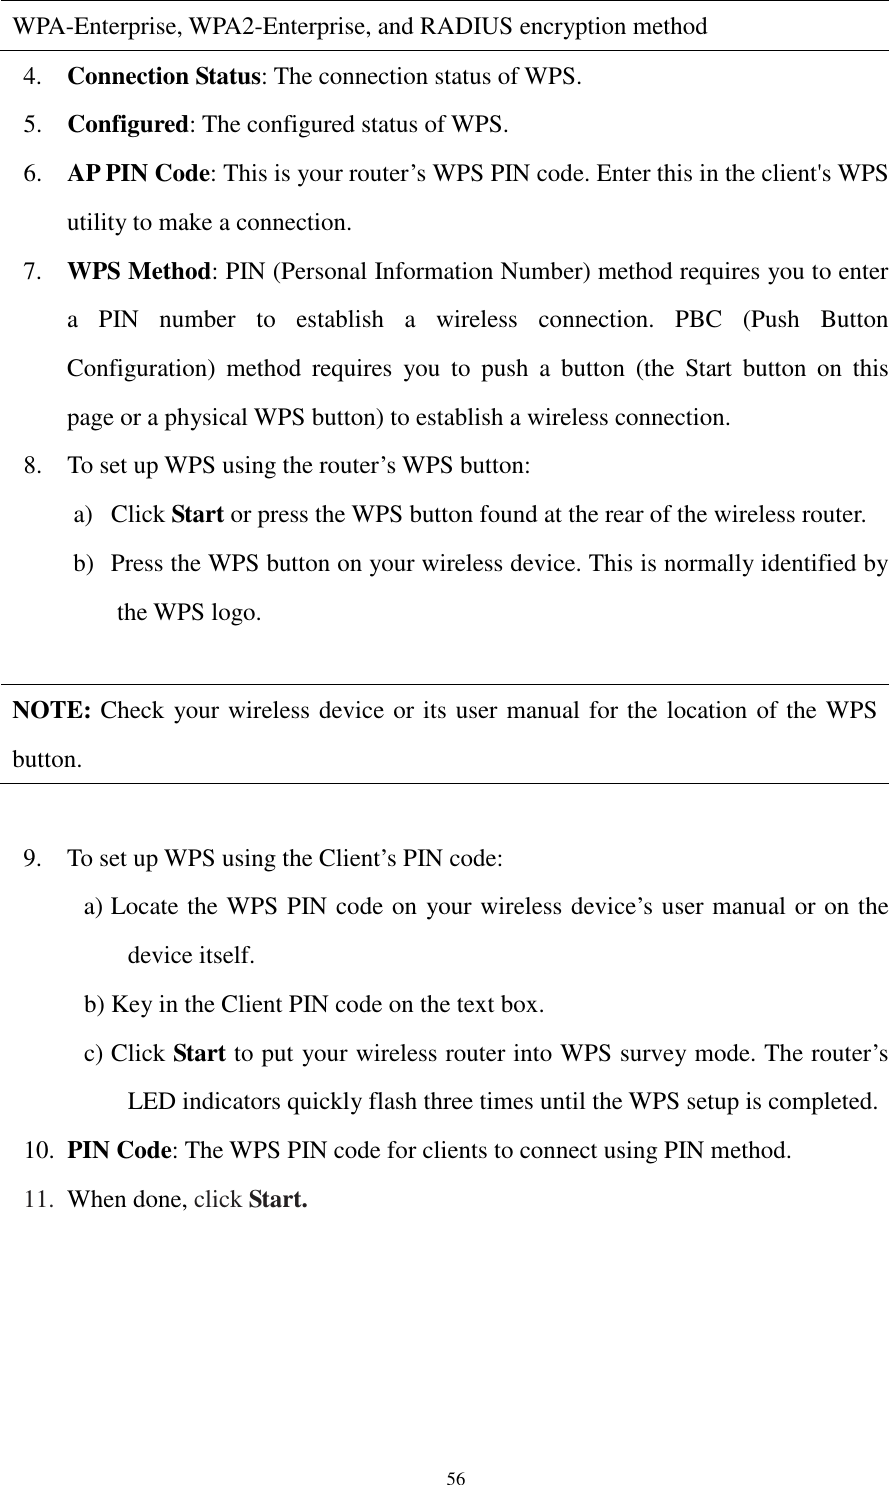  56 WPA-Enterprise, WPA2-Enterprise, and RADIUS encryption method 4. Connection Status: The connection status of WPS. 5. Configured: The configured status of WPS. 6. AP PIN Code: This is your router’s WPS PIN code. Enter this in the client&apos;s WPS utility to make a connection. 7. WPS Method: PIN (Personal Information Number) method requires you to enter a  PIN  number  to  establish  a  wireless  connection.  PBC  (Push  Button Configuration)  method  requires  you  to  push  a  button  (the  Start  button  on  this page or a physical WPS button) to establish a wireless connection. 8. To set up WPS using the router’s WPS button: a) Click Start or press the WPS button found at the rear of the wireless router. b) Press the WPS button on your wireless device. This is normally identified by the WPS logo.  NOTE: Check your wireless device or its user manual for the location of the WPS button.  9. To set up WPS using the Client’s PIN code: a) Locate the WPS PIN code on your wireless device’s user manual or on the device itself.   b) Key in the Client PIN code on the text box. c) Click Start to put your wireless router into WPS survey mode. The router’s LED indicators quickly flash three times until the WPS setup is completed. 10. PIN Code: The WPS PIN code for clients to connect using PIN method. 11. When done, click Start.  